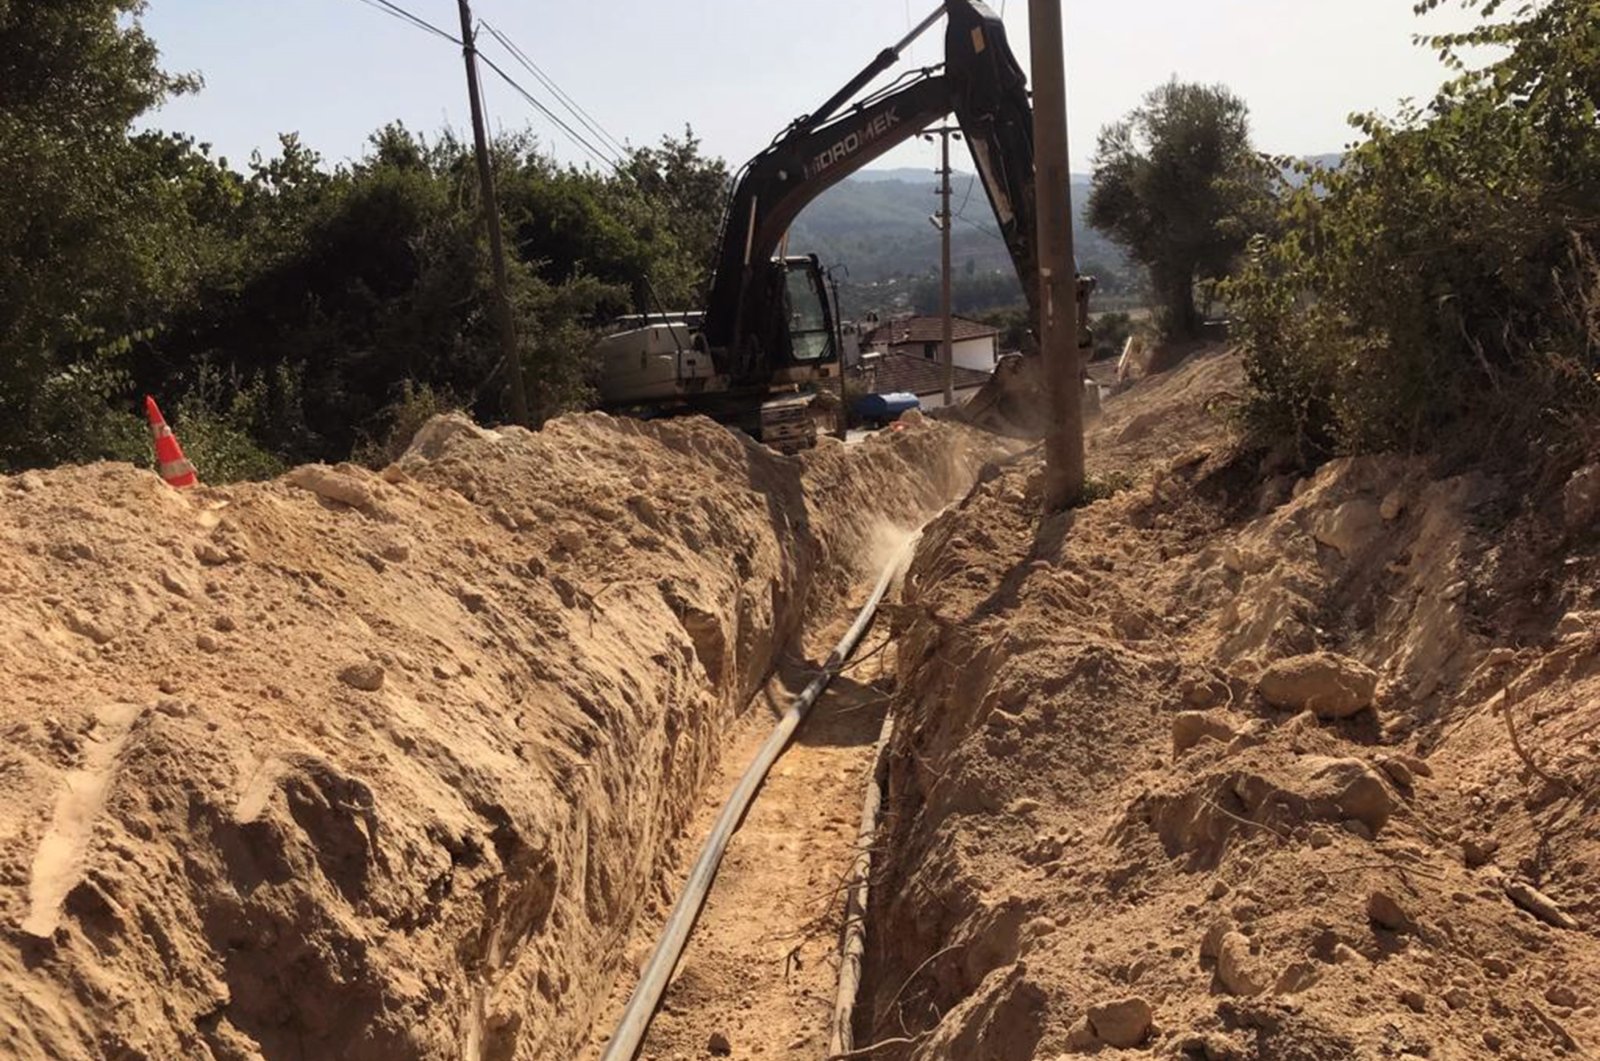 Municipality efforts to partially meet the water demand by reserving water solely for essential consumption, Muğla, Türkiye, Oct. 20, 2023. (IHA Photo)